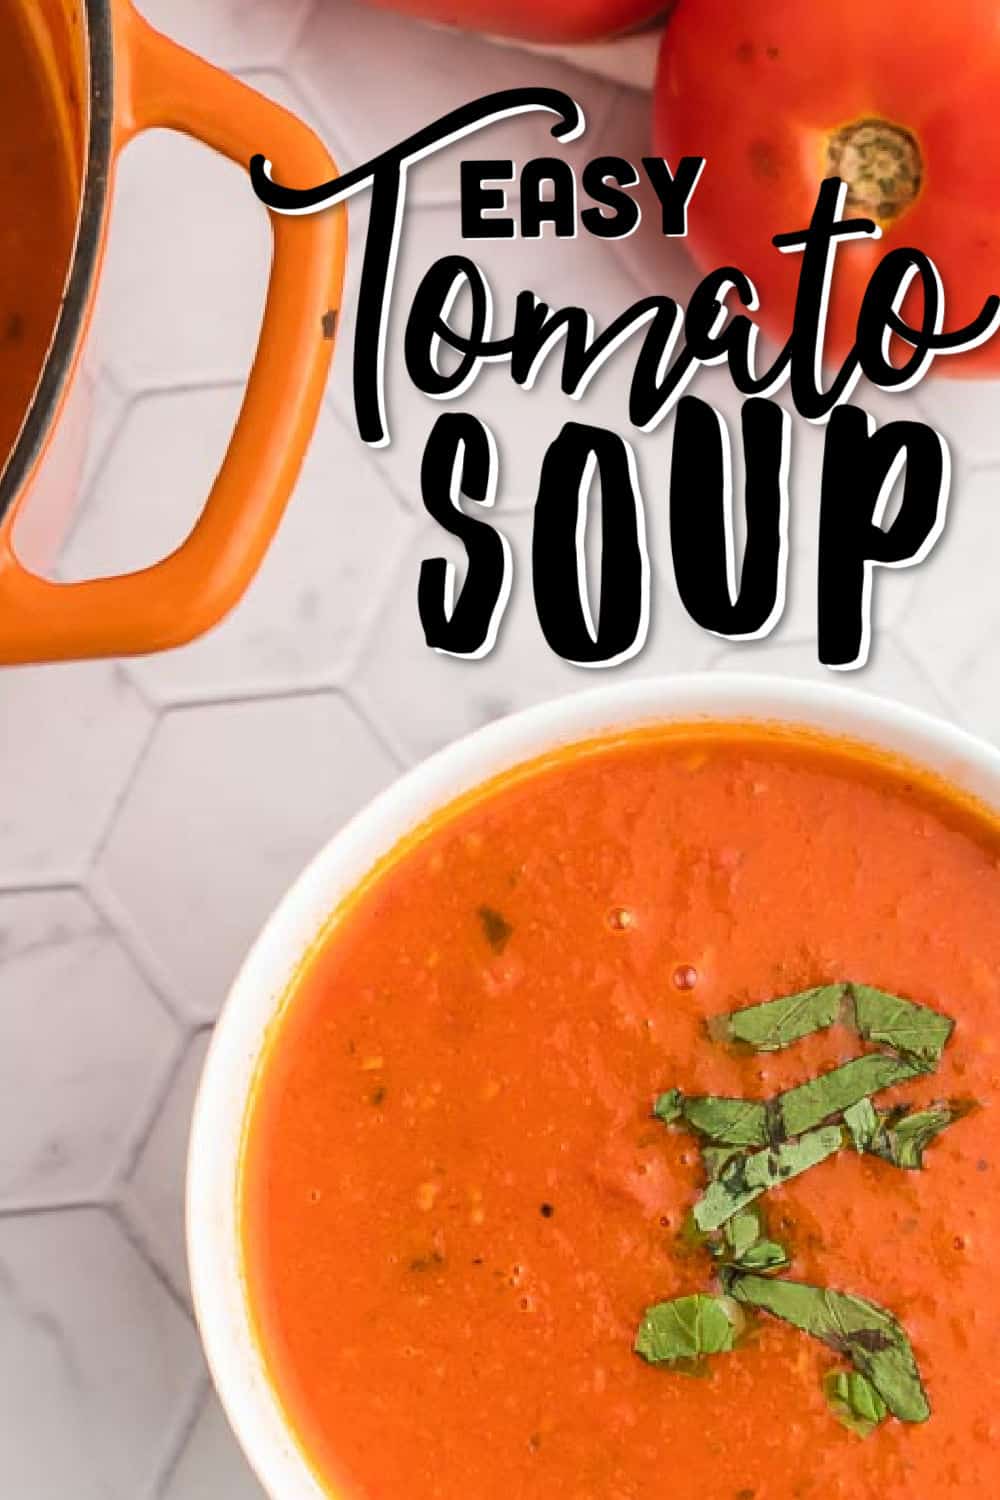 This easy, homemade, 4-ingredient, rustic Tomato Soup is packed with the flavors of ripe and juicy fresh tomatoes. Combined with fragrant garlic, fresh basil, and sweet extra virgin olive oil, it's the perfect late summer lunchtime soup. Tomato and Basil Soup | Easy Recipe | Non-Dariy | 30 Minute Meals #cheerfulcook #tomatosoup # recipe #tomatoes #nondariy  via @cheerfulcook